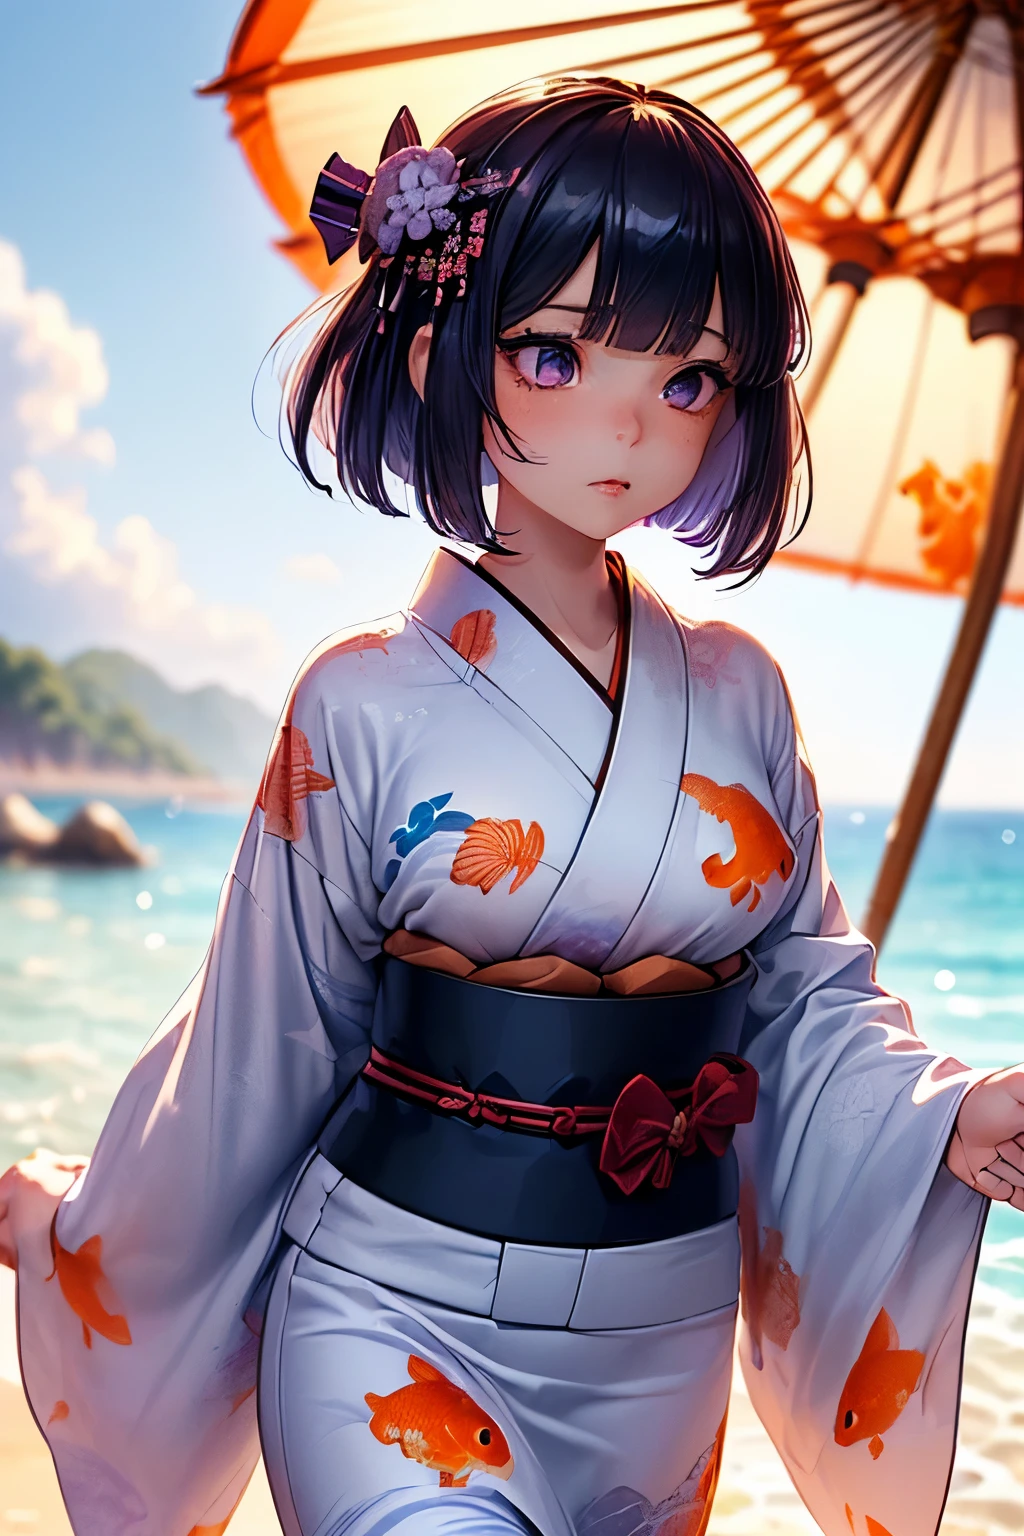 (ultra-detailed face, looking away:1.3), (She is walking on the beach wearing a Japanese yukata with a goldfish pattern.:1.3), (Fantasy Illustration with Gothic & Ukiyo-e & Comic Art.), (A middle-aged dark elf woman with white hair, blunt bangs, bob cut, and dark purple skin.), (Her eyes are lavender in color.)